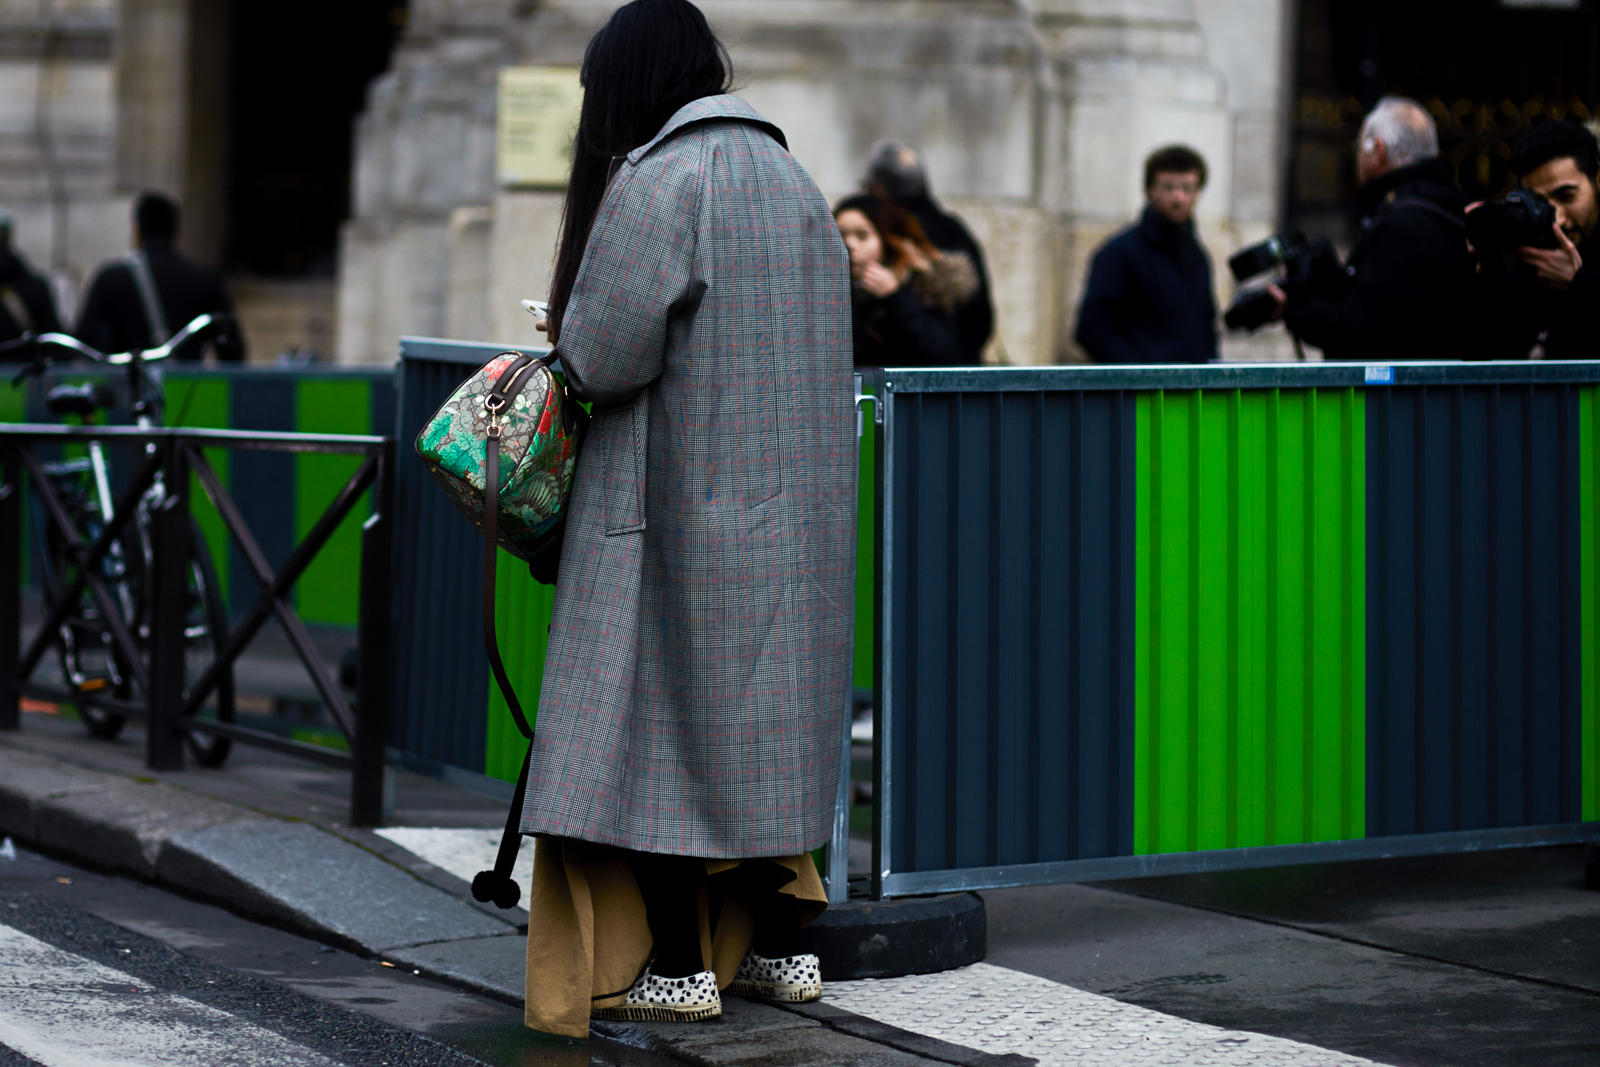 PFW Street Style: Fashion Blogger Susie Lau wearing a long coat and Gucci bag before the Stella McCartney Fall 2016 fashion show in Paris, France